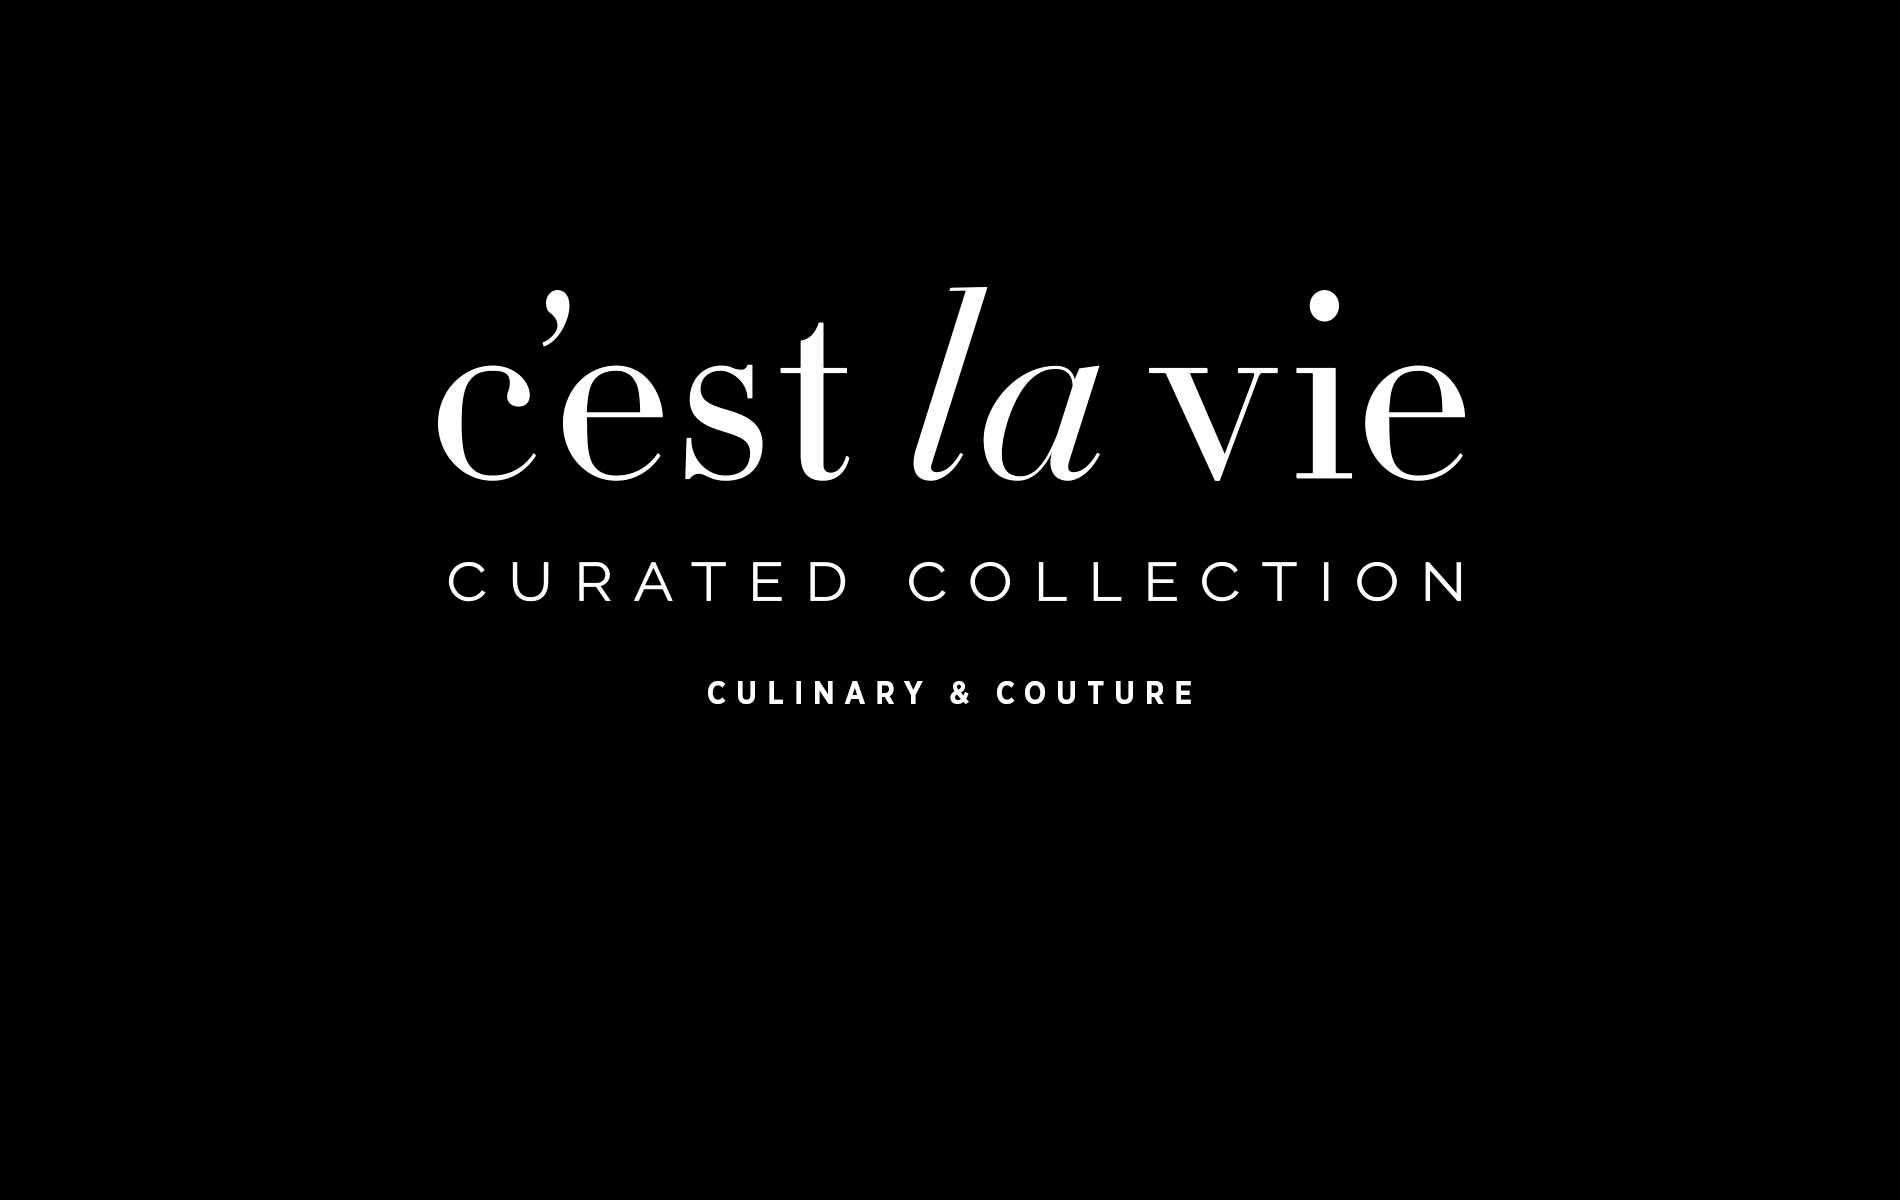 C'est la VIE Curated Collection: Culinary & Couture March/April 2017